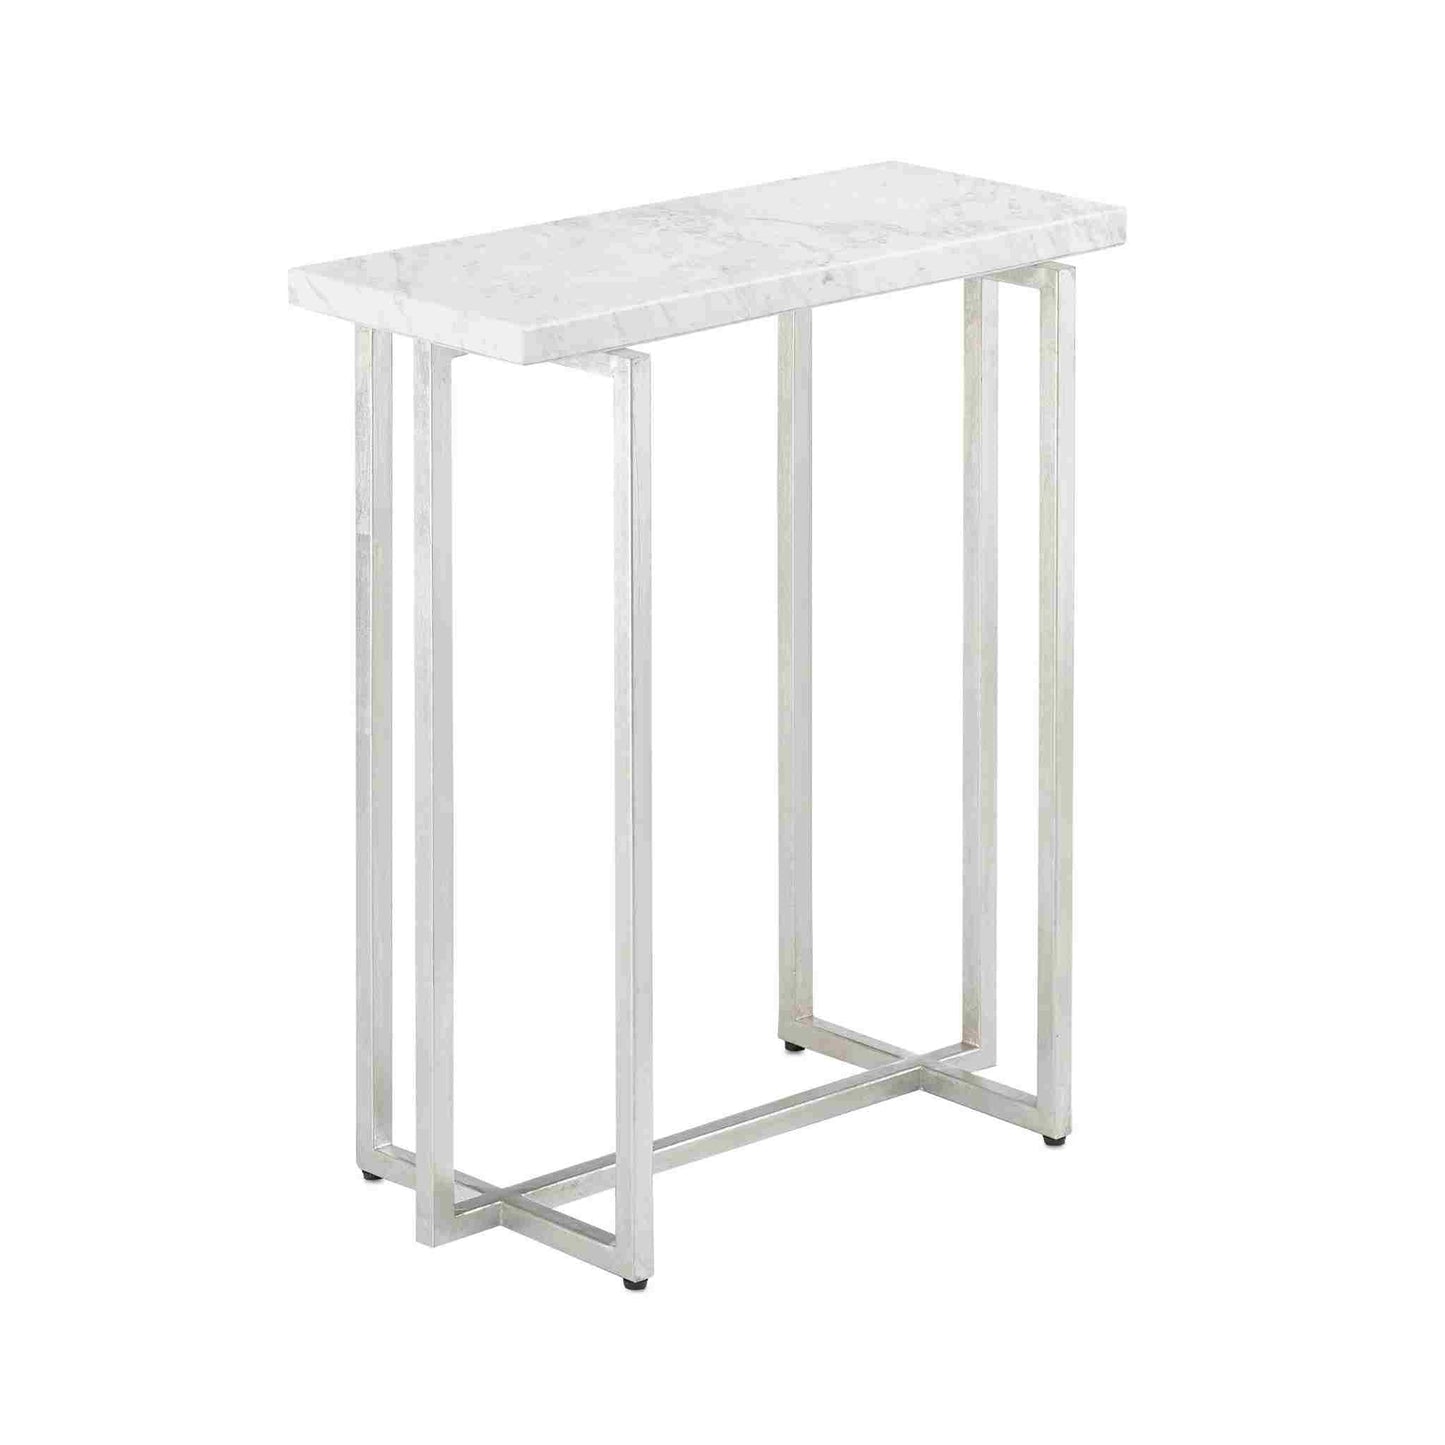 Cora Accent Table 22"h x 19"w x 9.5"d